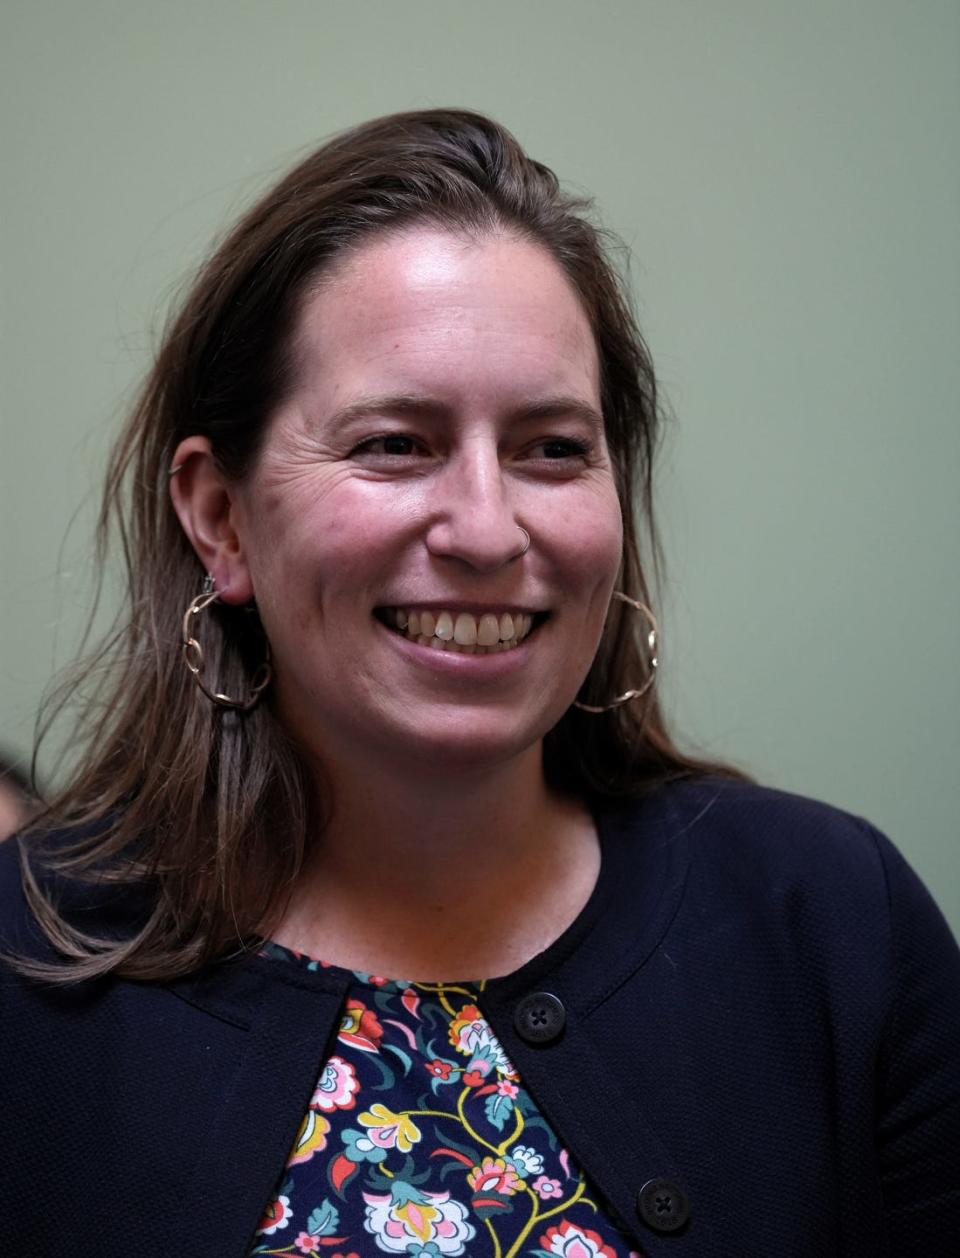 Sen. Meghan E. Kallman, D-Pawtucket, sponsored the "Create Homes Act", which would allow the state to buy land and build housing where some pay subsidized rates and others pay full price.